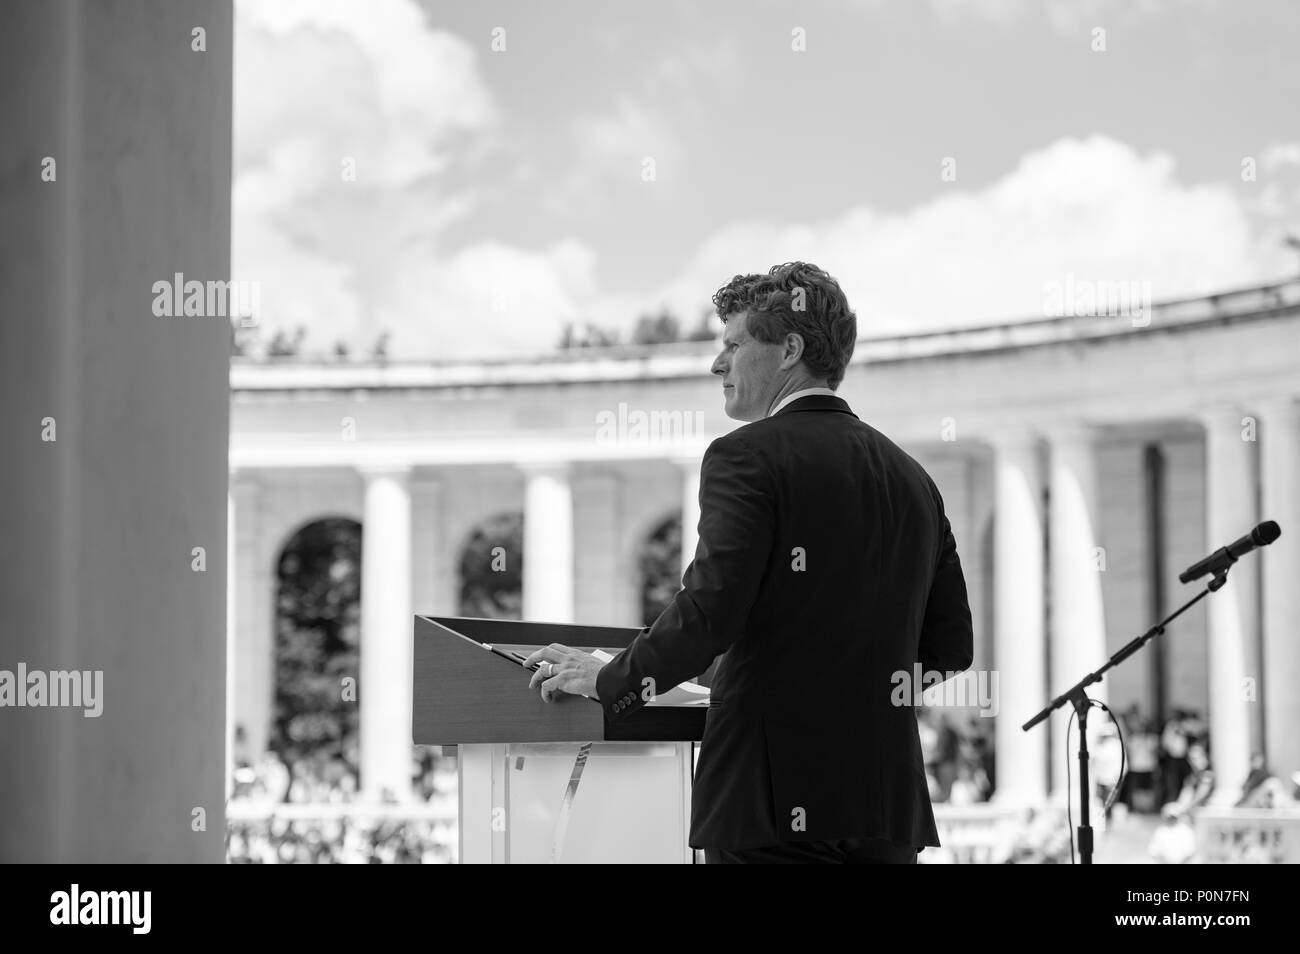 U.S. Rep. Joe Kennedy III speaks during a ceremony celebrating the life of his grandfather, Sen. Robert F. Kennedy, on the 50th anniversary of Sen. Kennedy's assassination, in the Memorial Amphitheater at Arlington National Cemetery, Arlington, Virginia, June 6, 2018. The ceremony was open to the public and attended by former President Bill Clinton, Ethel Kennedy, Kathleen Kennedy Townsend, and U.S. Rep. John Lewis, among others. (U.S. Army photo by Elizabeth Fraser / Arlington National Cemetery / released) (This image was created in color and changed to black-and-white) Stock Photo